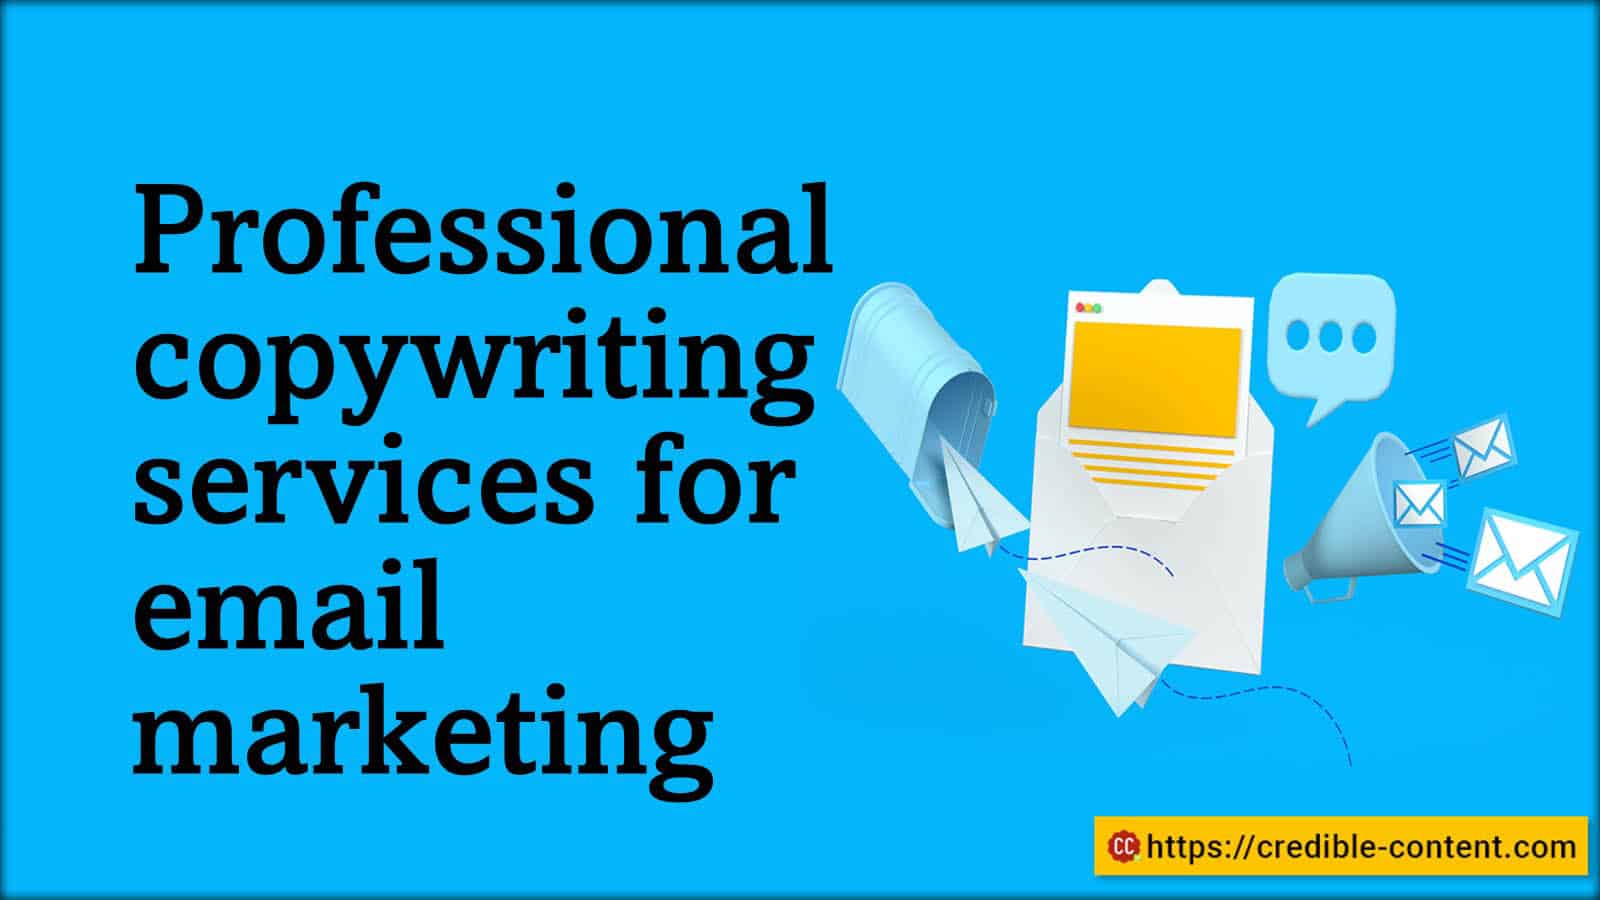 Professional copywriting services for email marketing